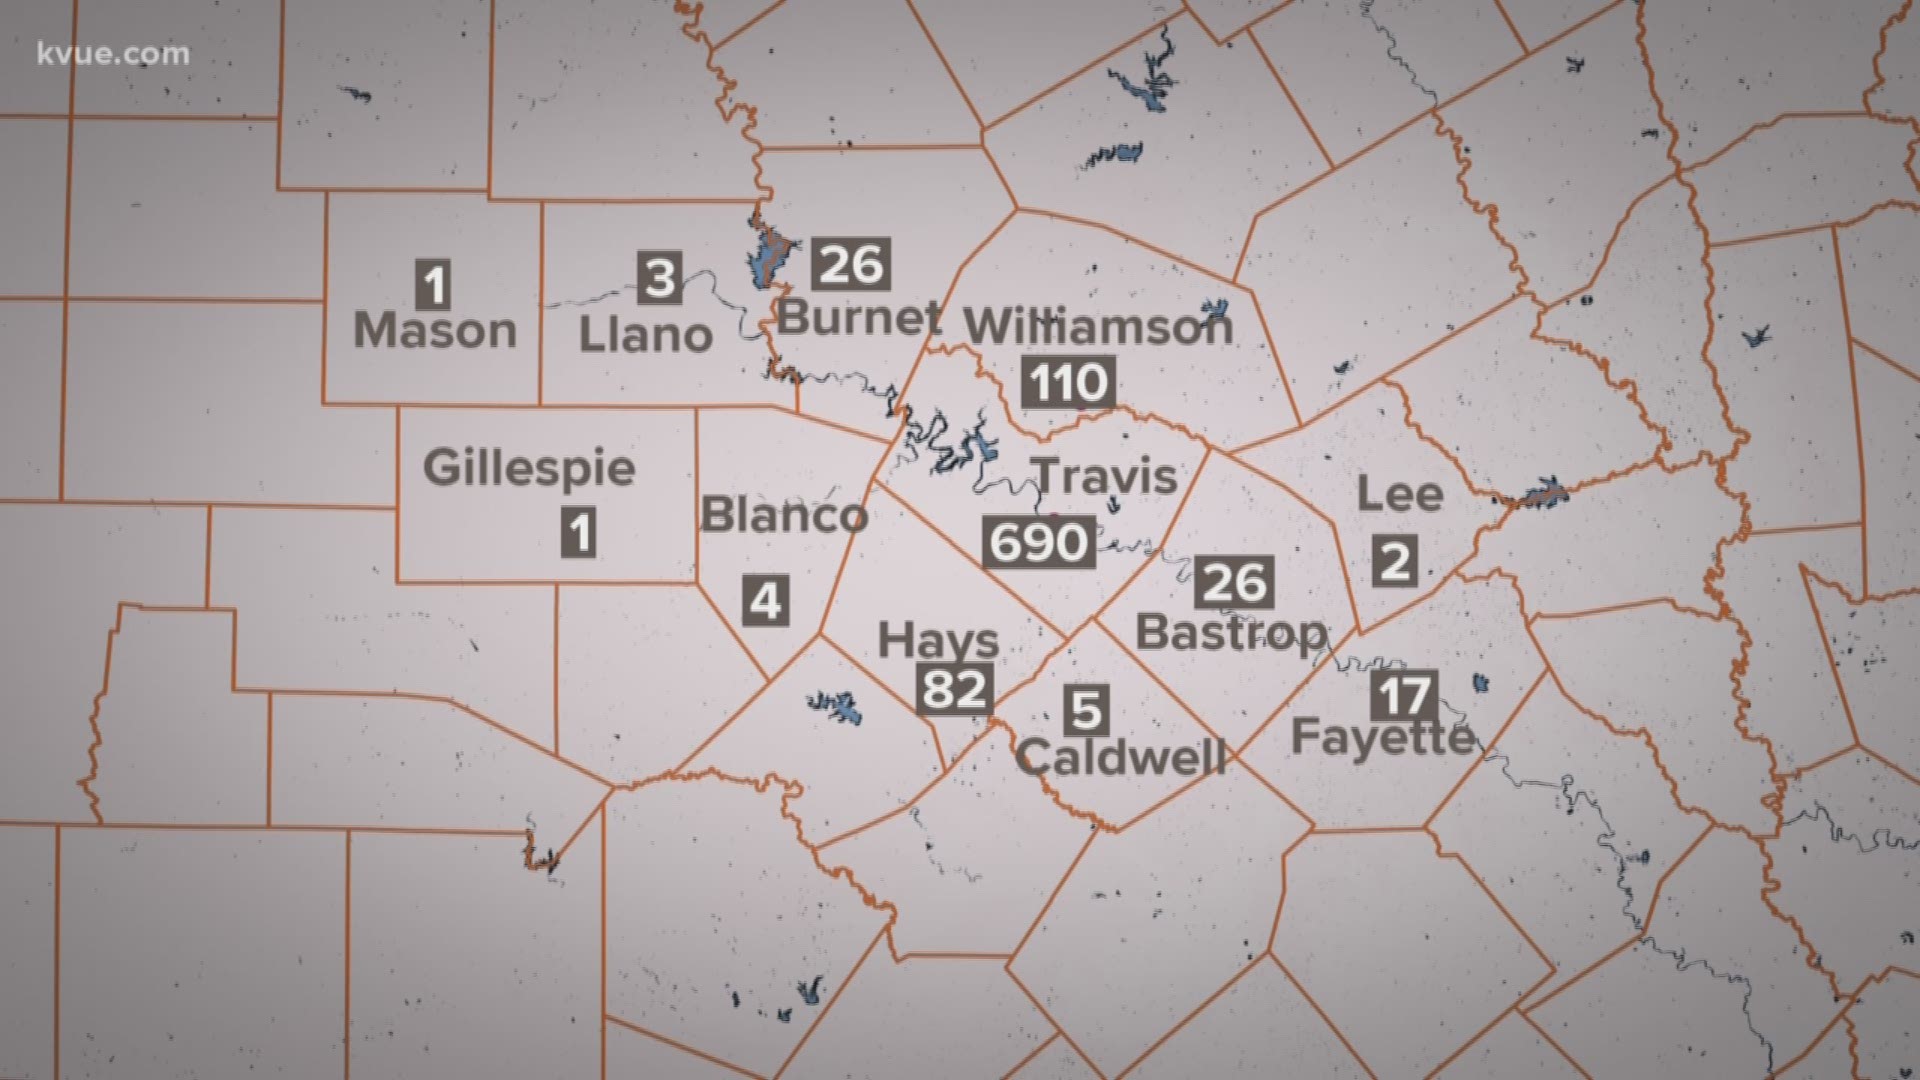 Texas has confirmed more than 11,000 cases. EDITOR'S NOTE: The map in this video states that Burnet County has 26 cases. However, the DSHS is reporting 6 cases.